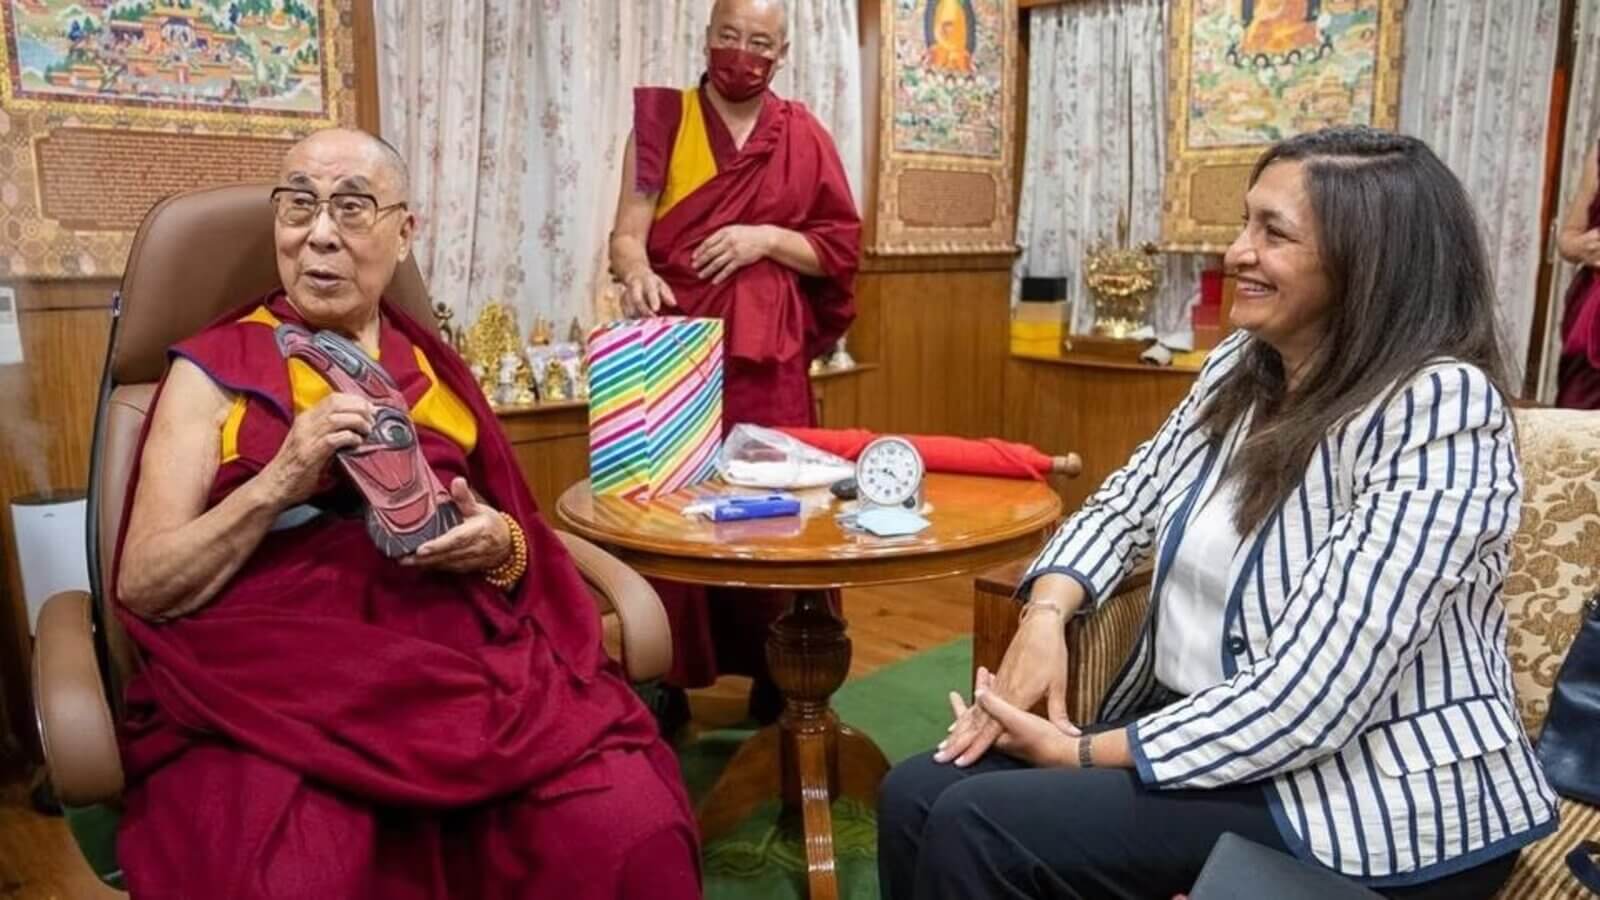 US Special Envoy Meets Dalai Lama in India, China Infuriated by “Political Manipulation” Vis-à-Vis Tibet